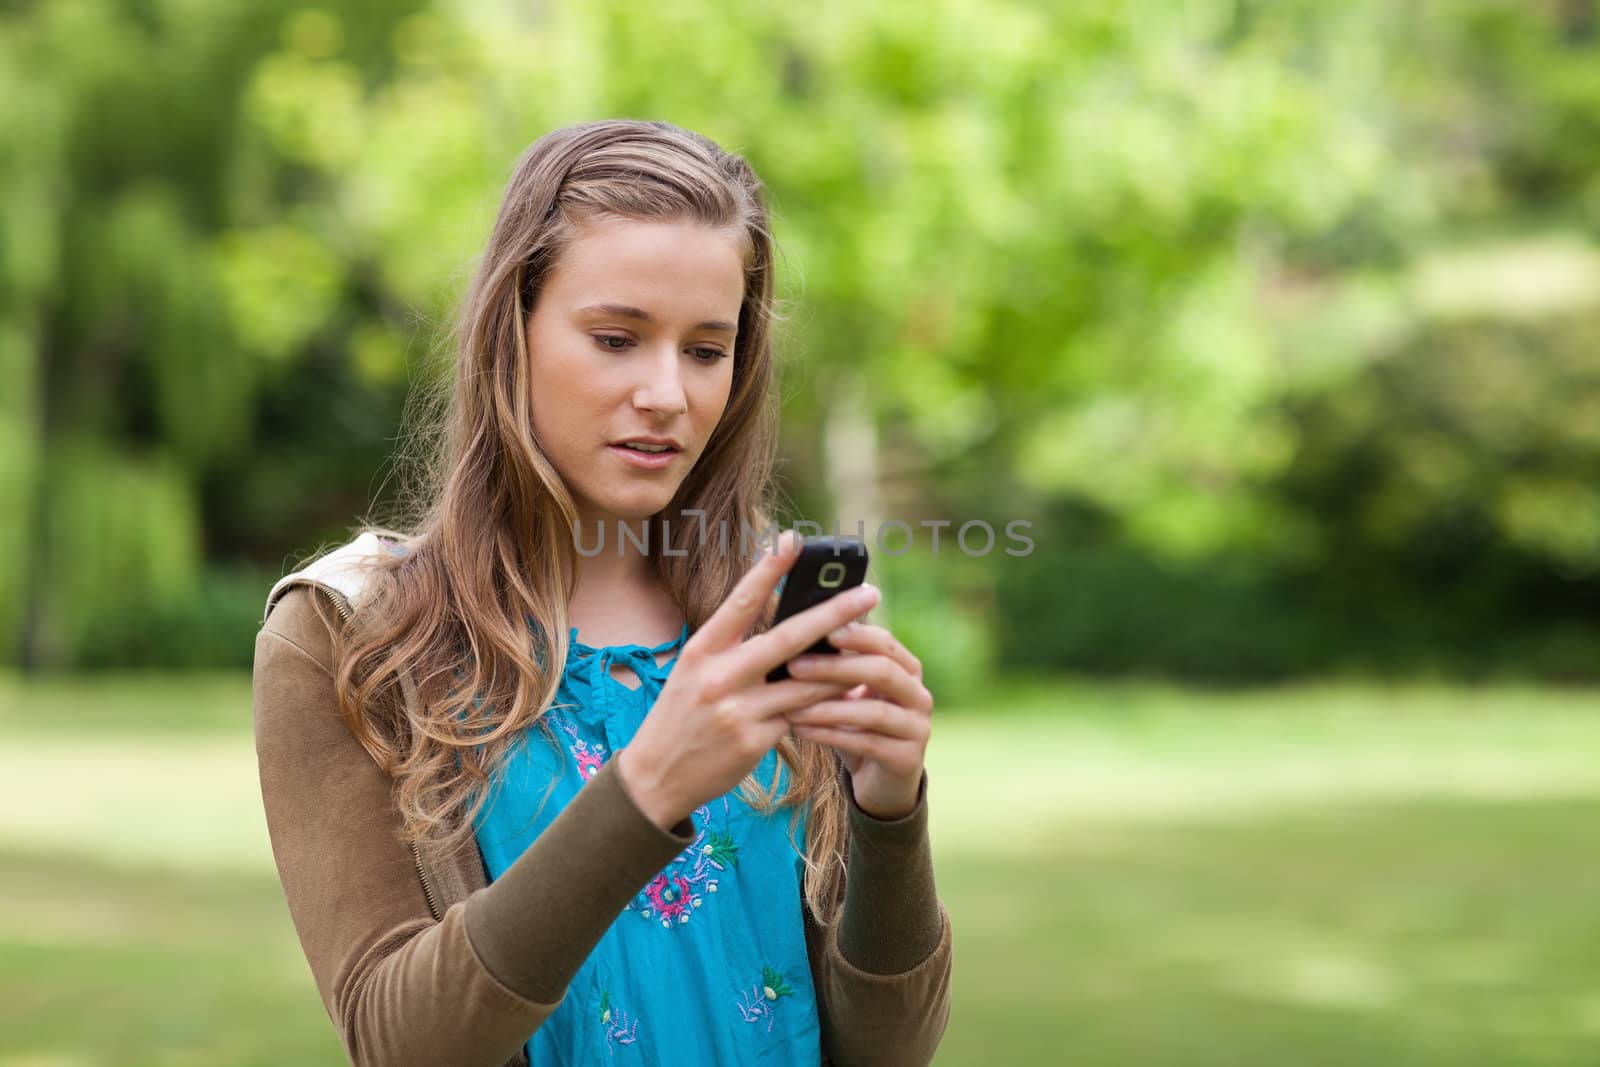 Serious teenager sending a text with her cellphone while standing in a park